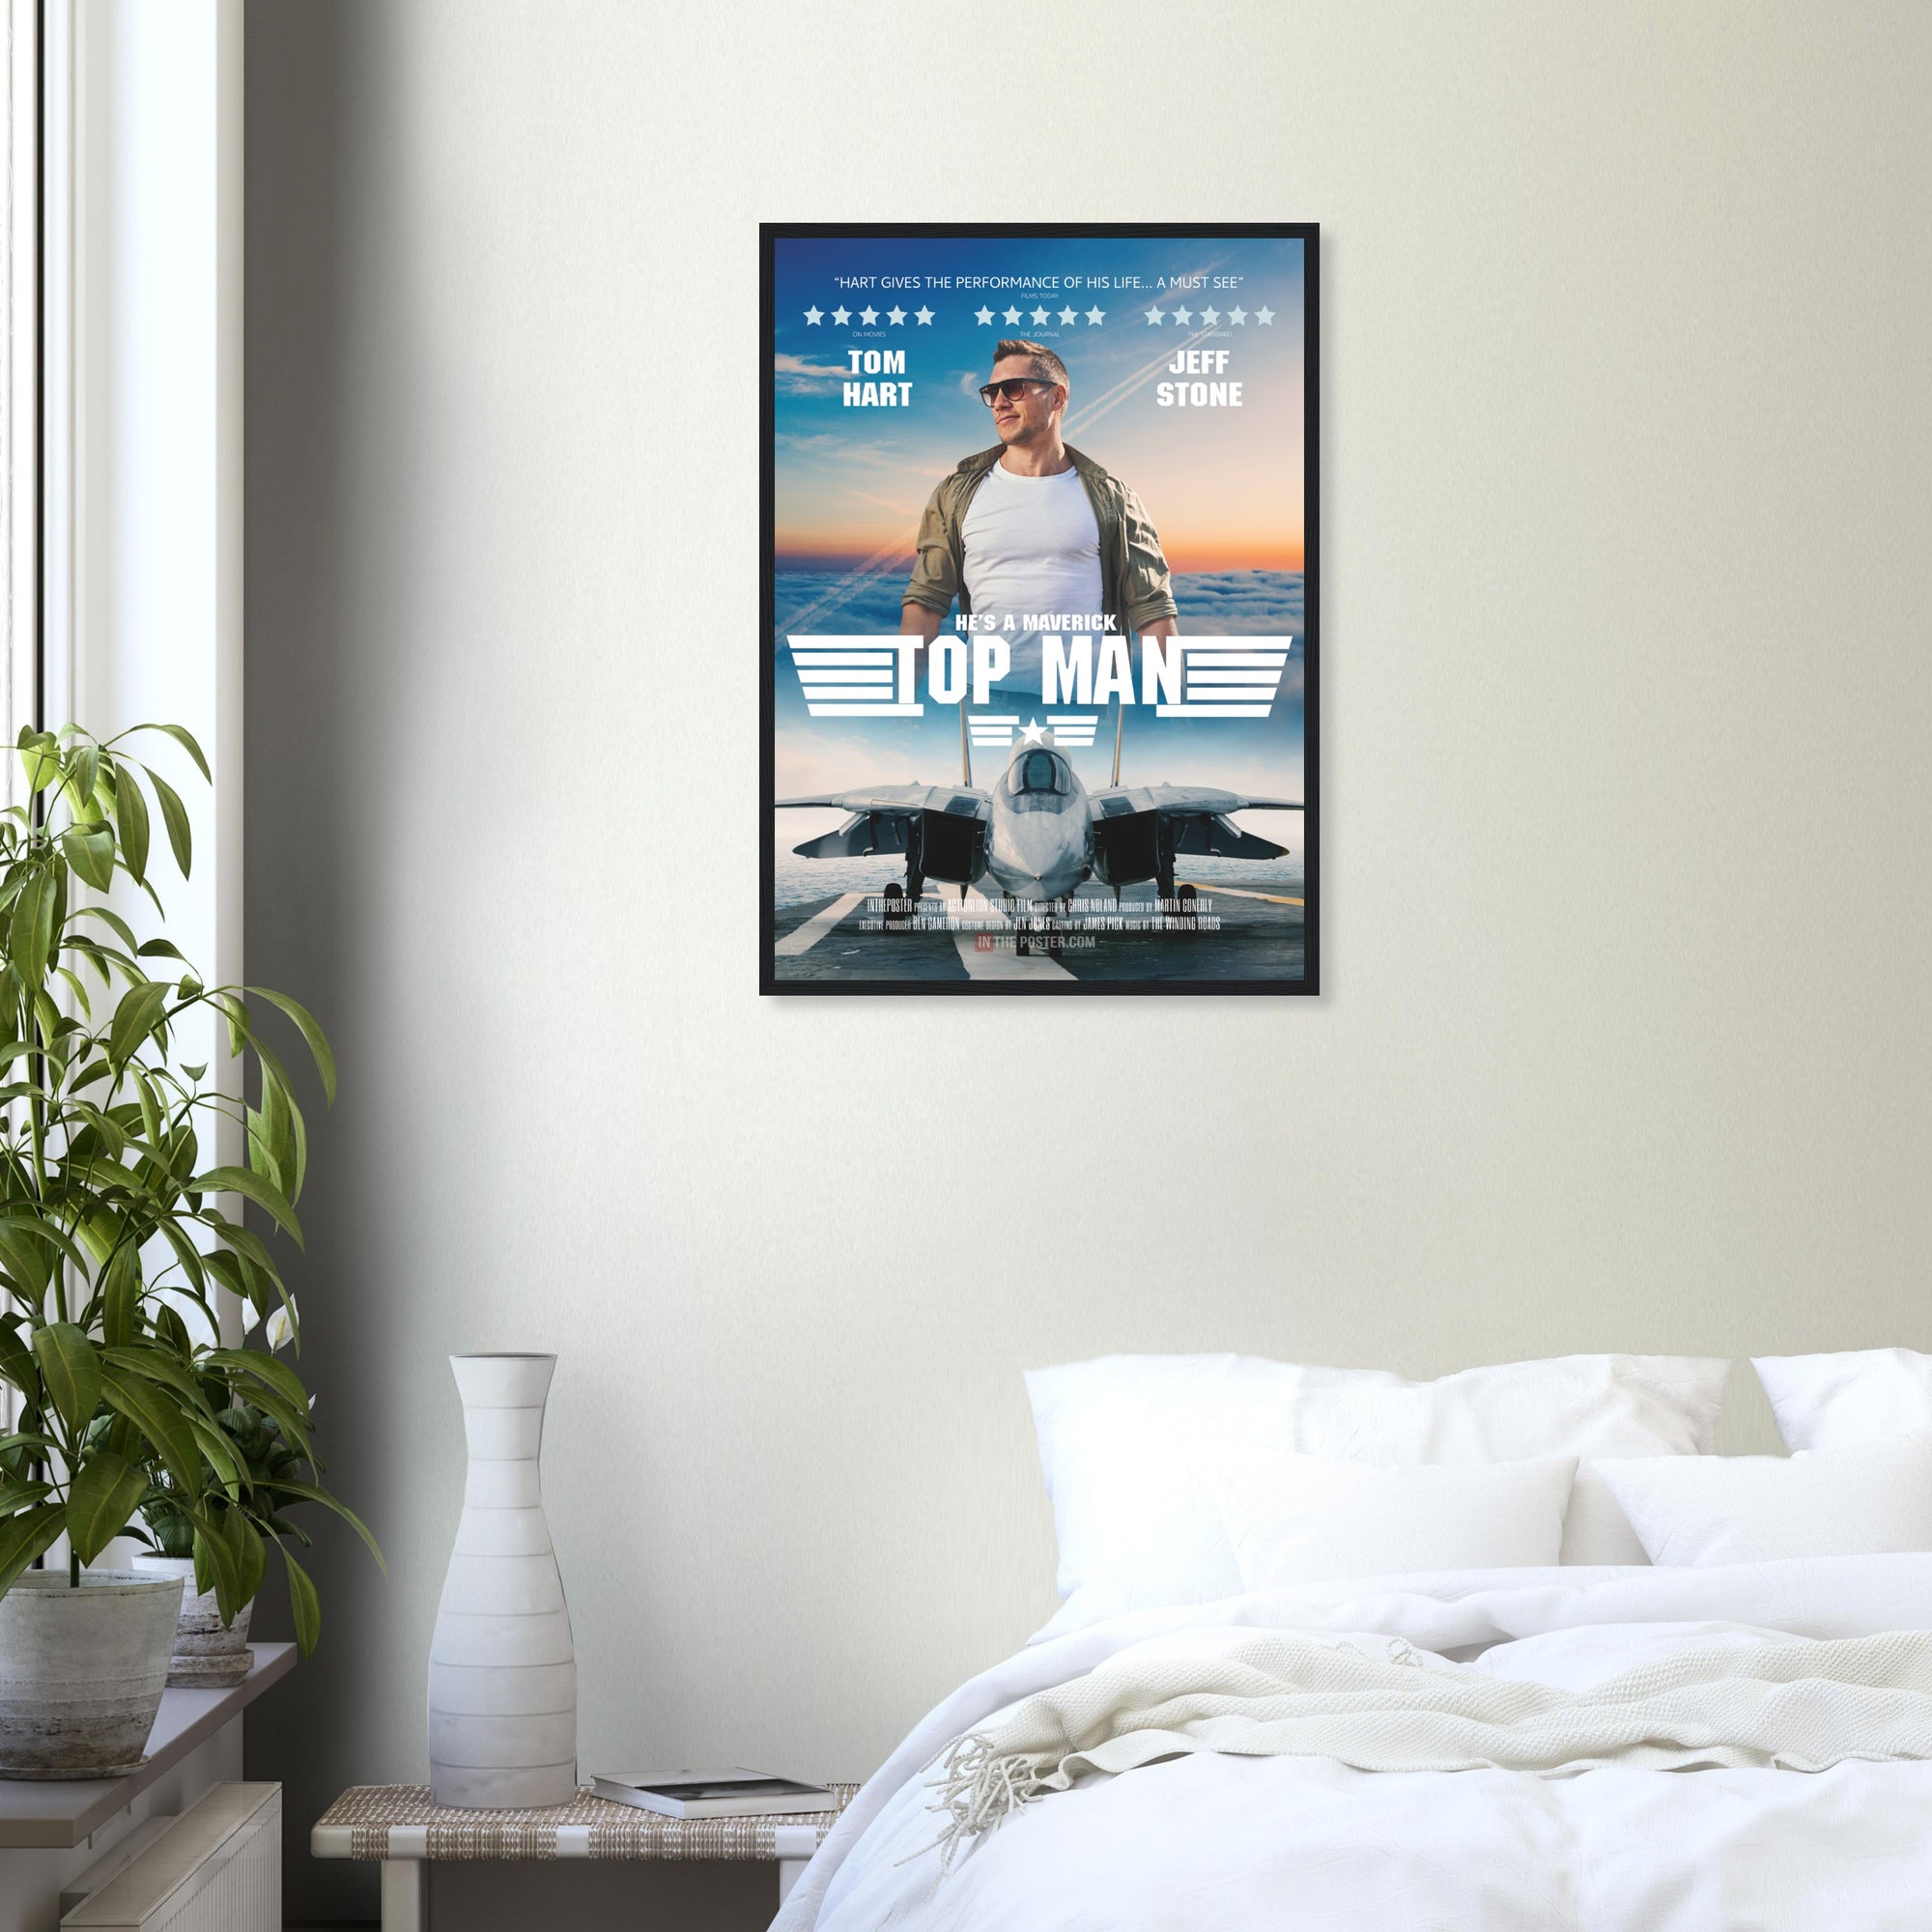 A fighter jet movie poster in regular size and a black frame, on a grey wall above a bed and green house plant